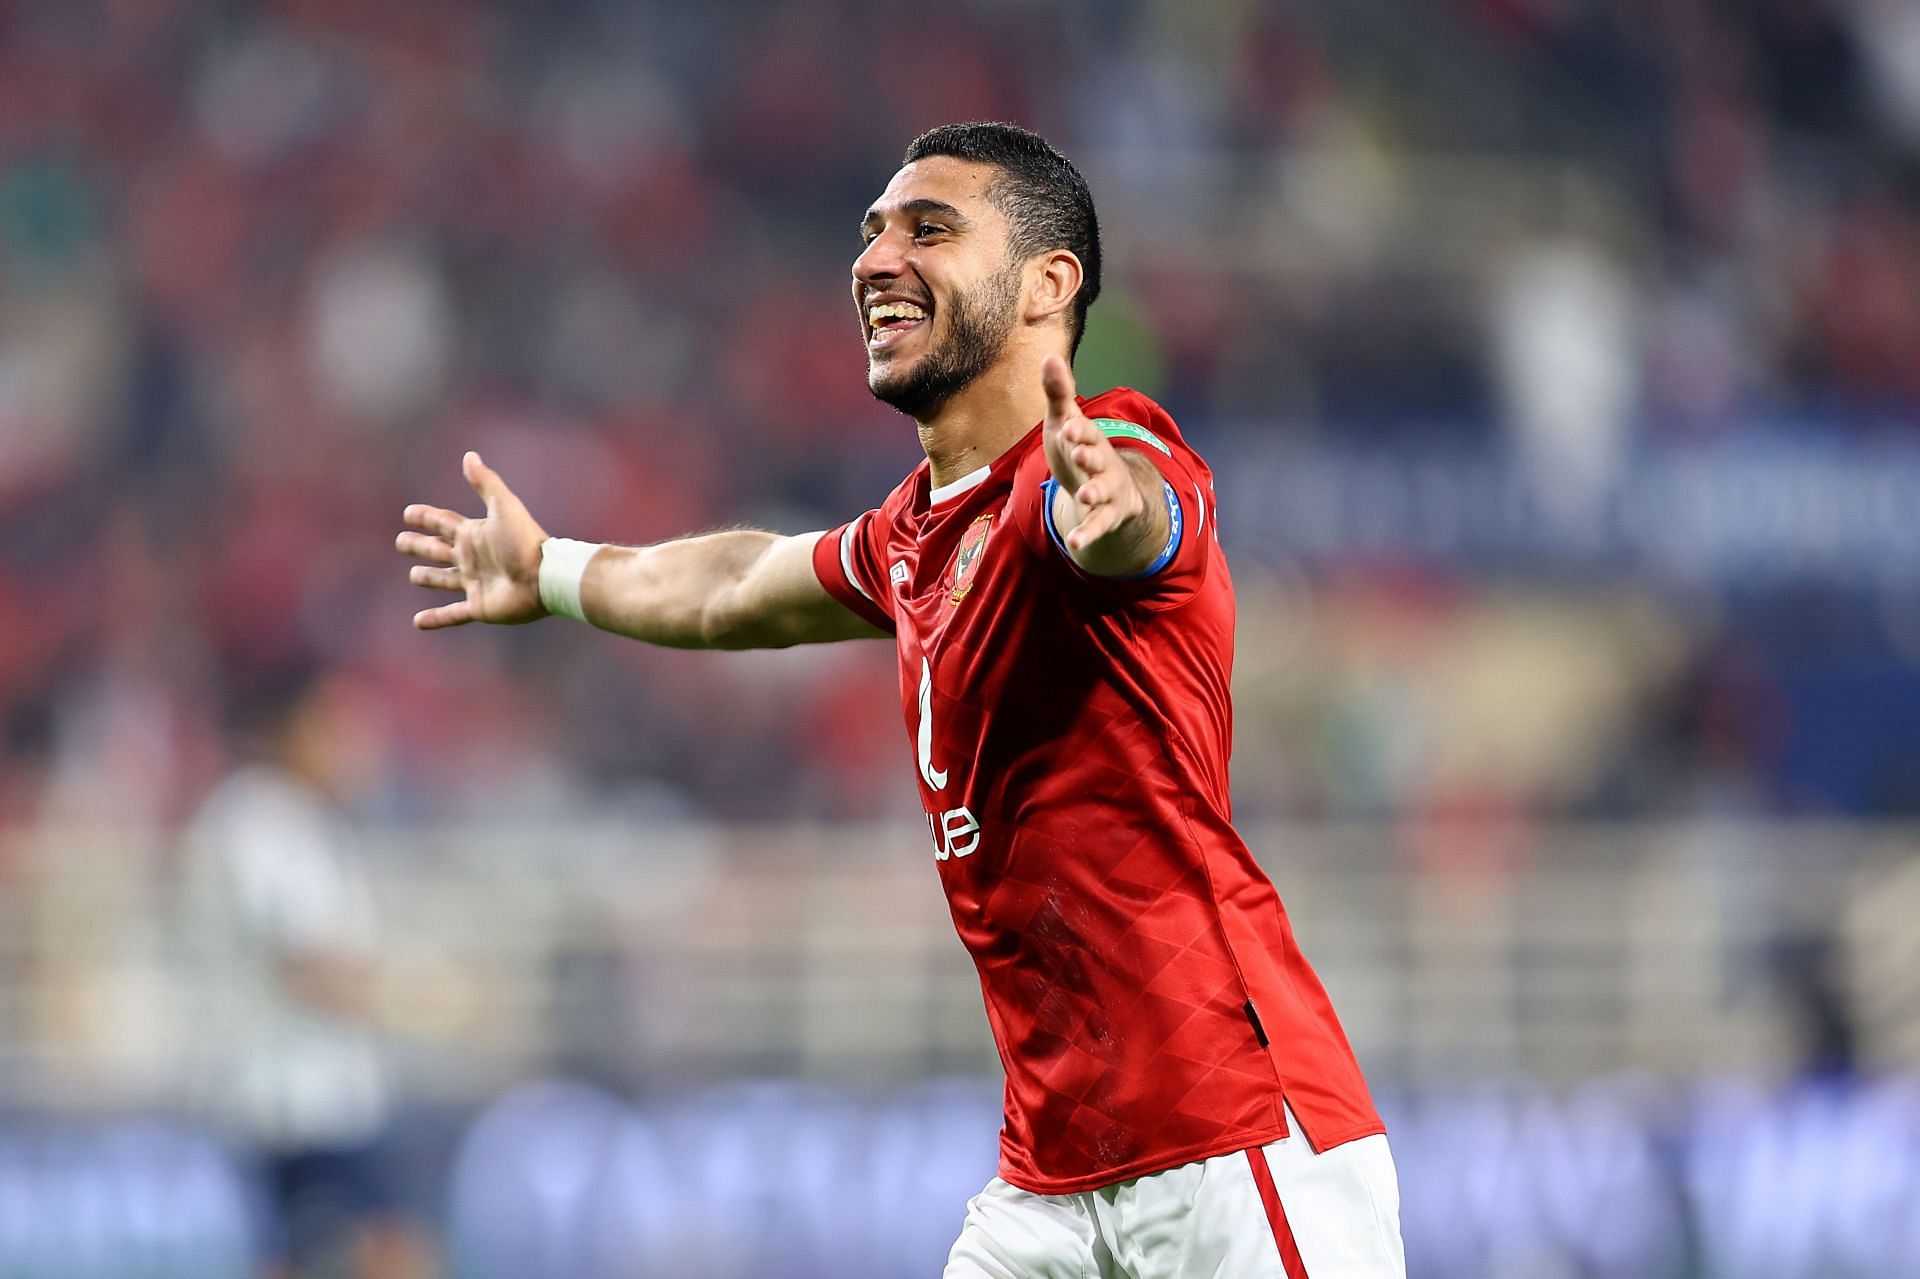 Al Ahly SC and Wydad Casablanca square off in the CAF Champions League 2021-22 final on Monday